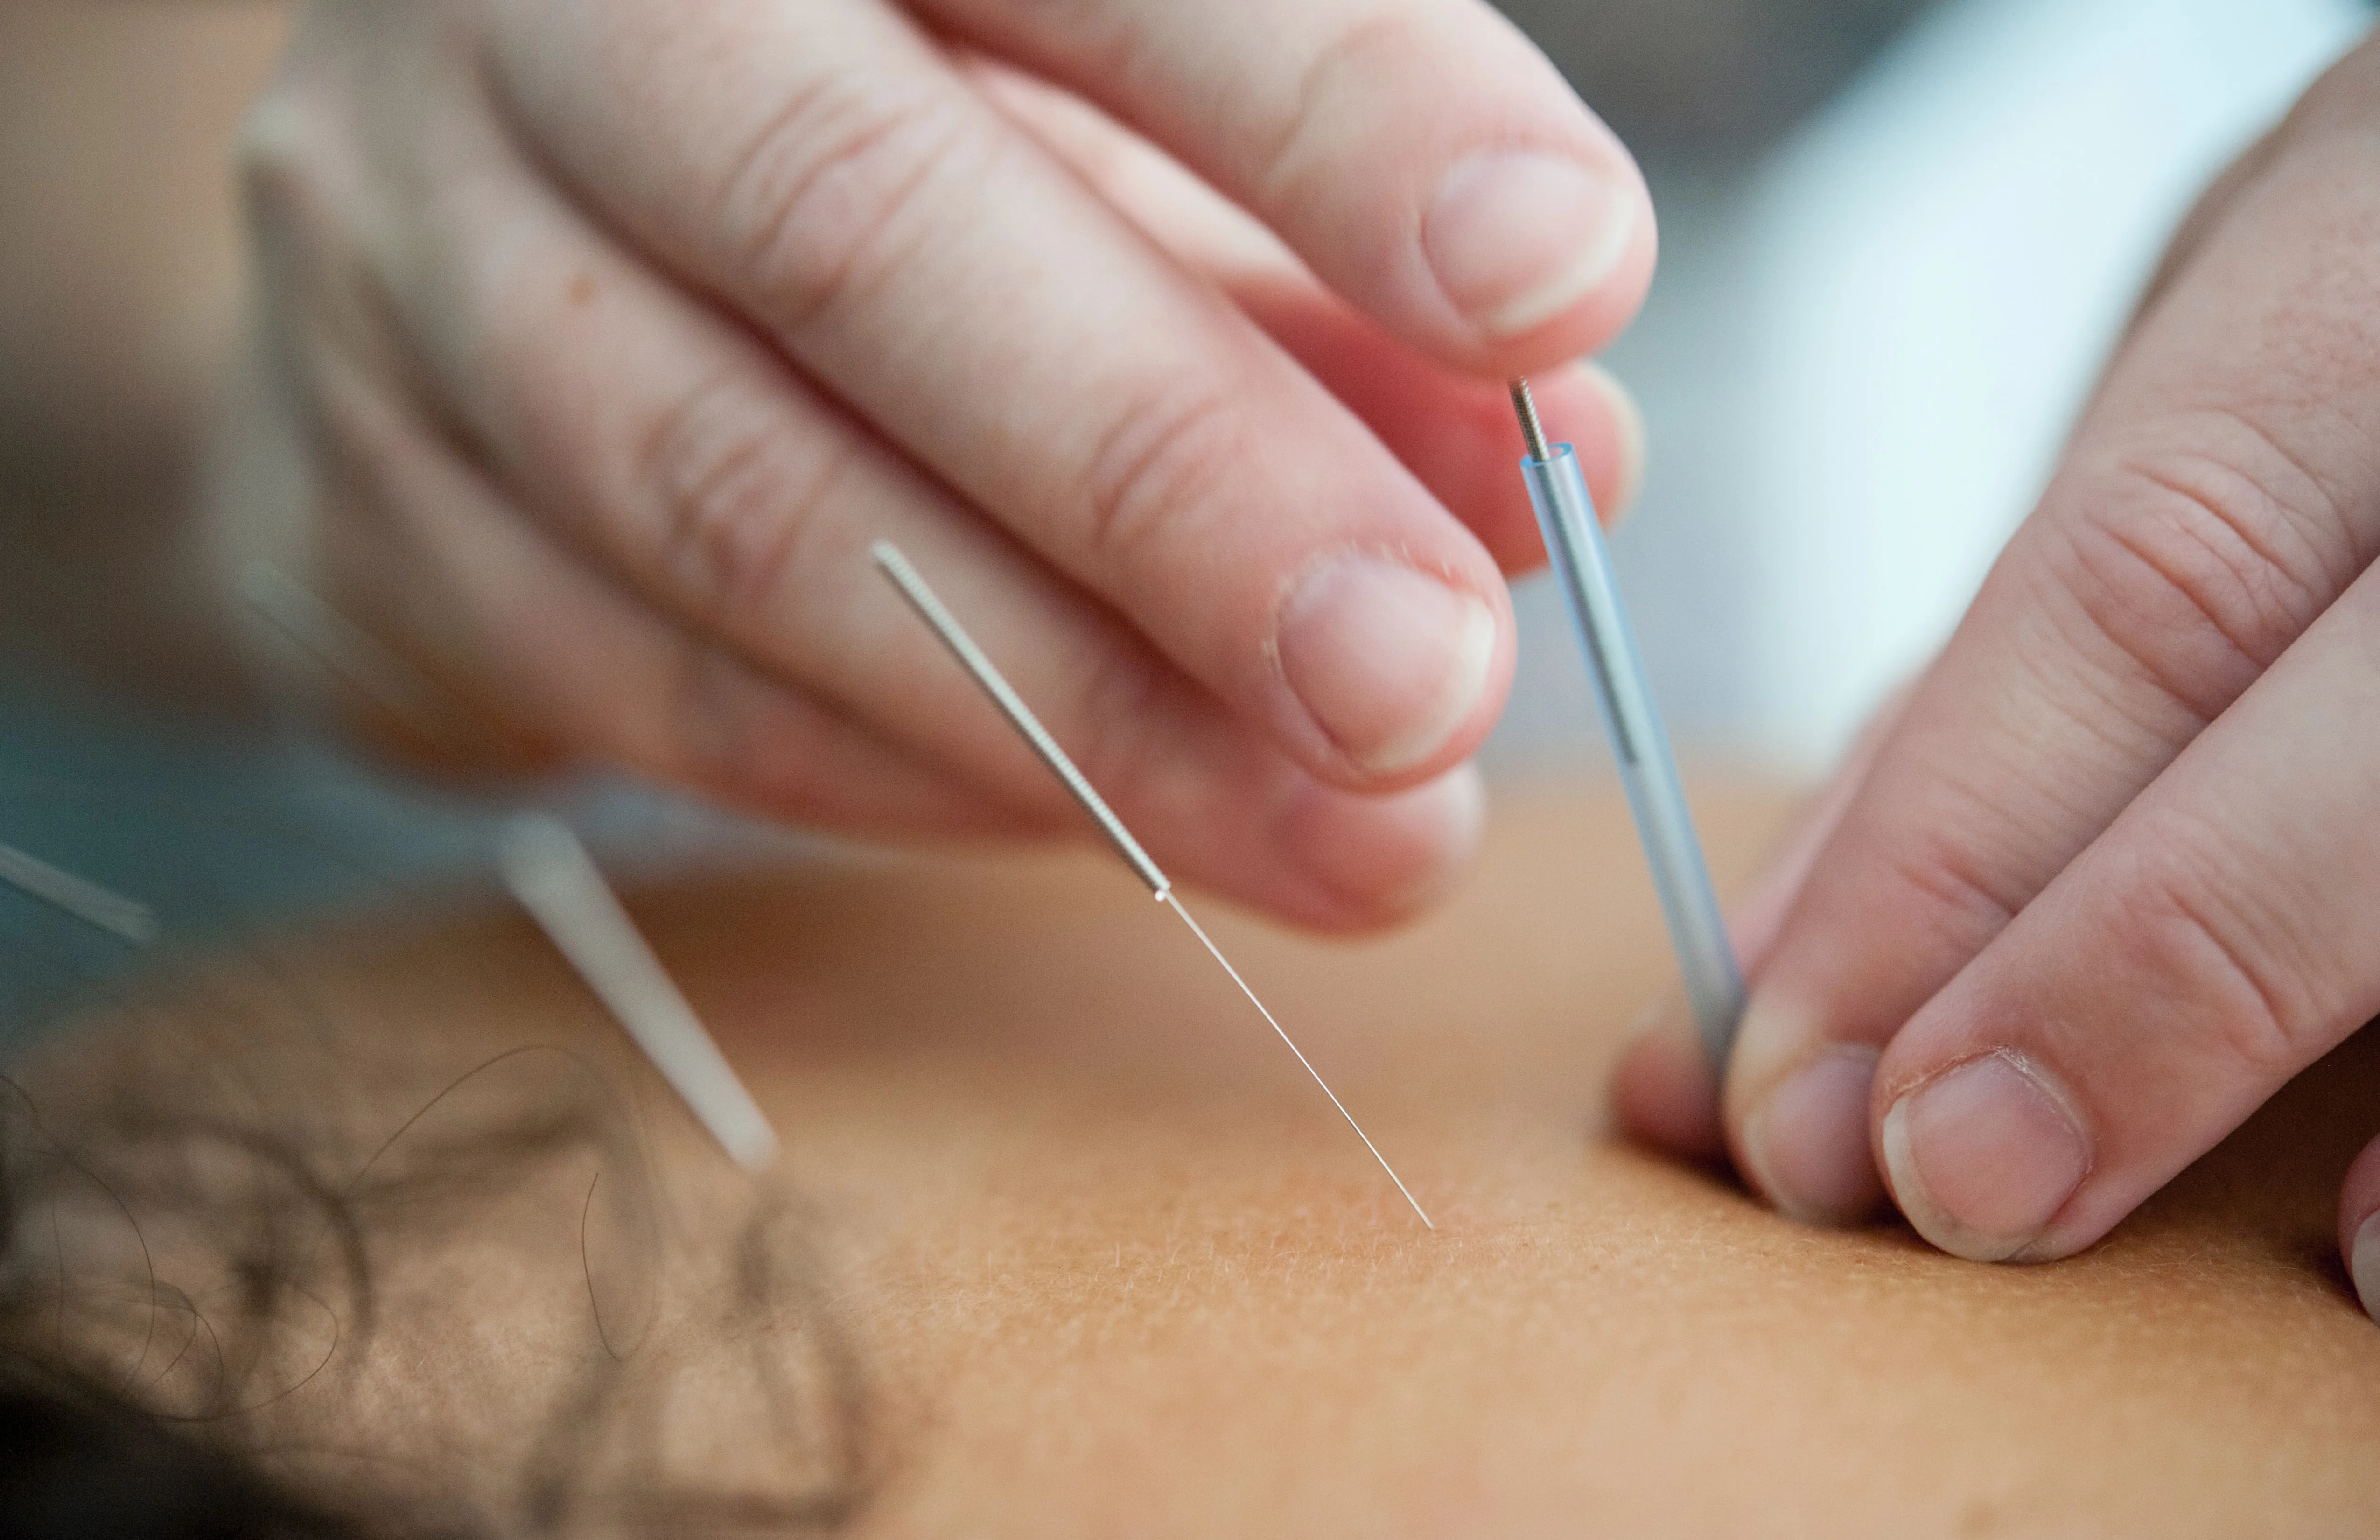 acupuncture pins in someones back